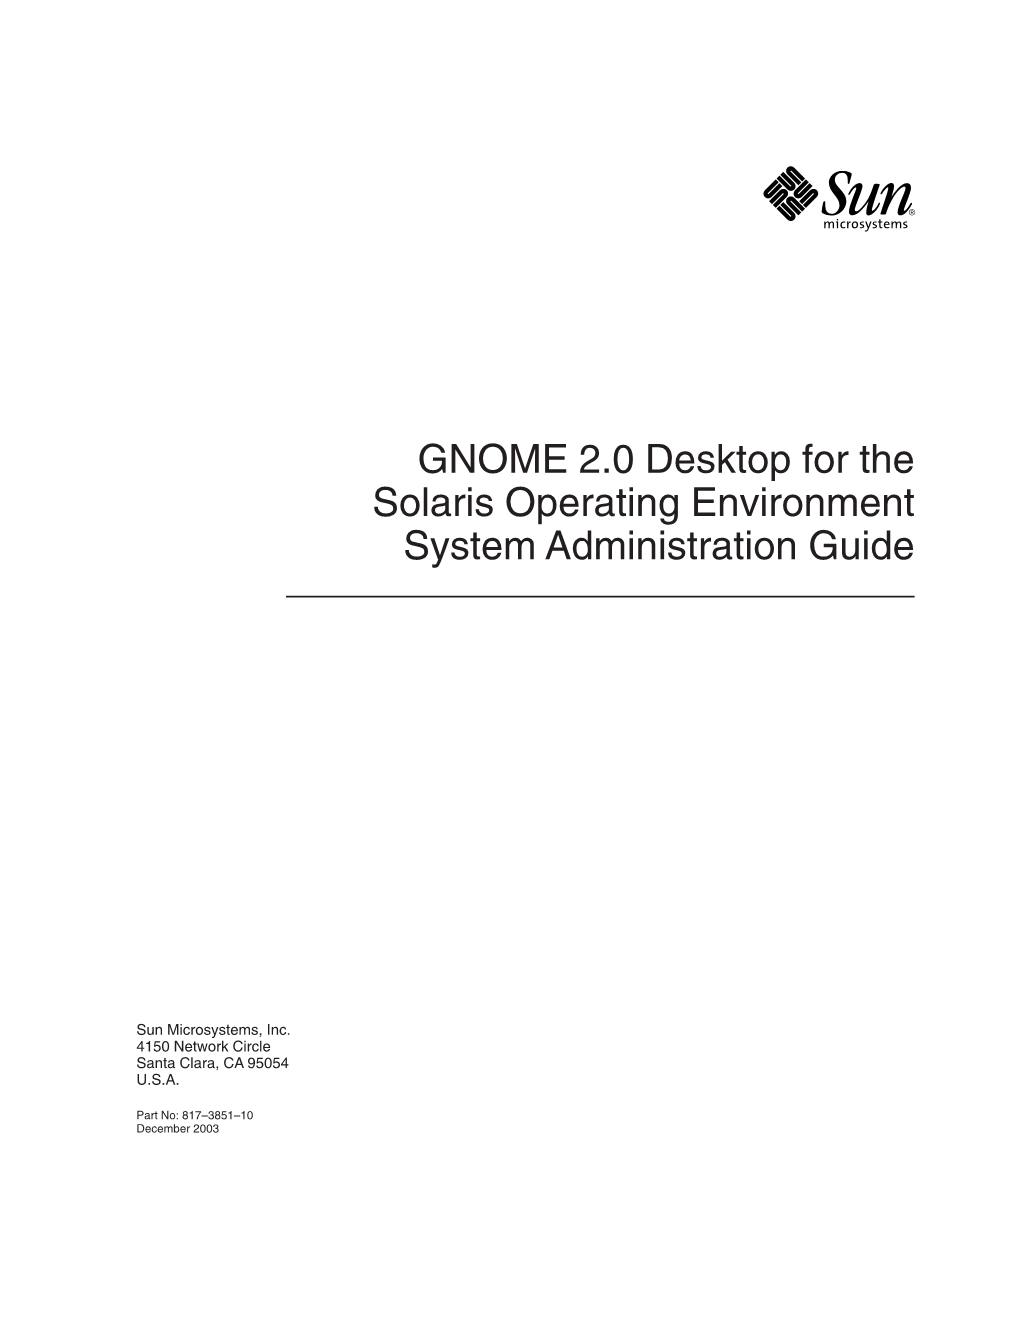 GNOME 2.0 Desktop for the Solaris Operating Environment System Administration Guide